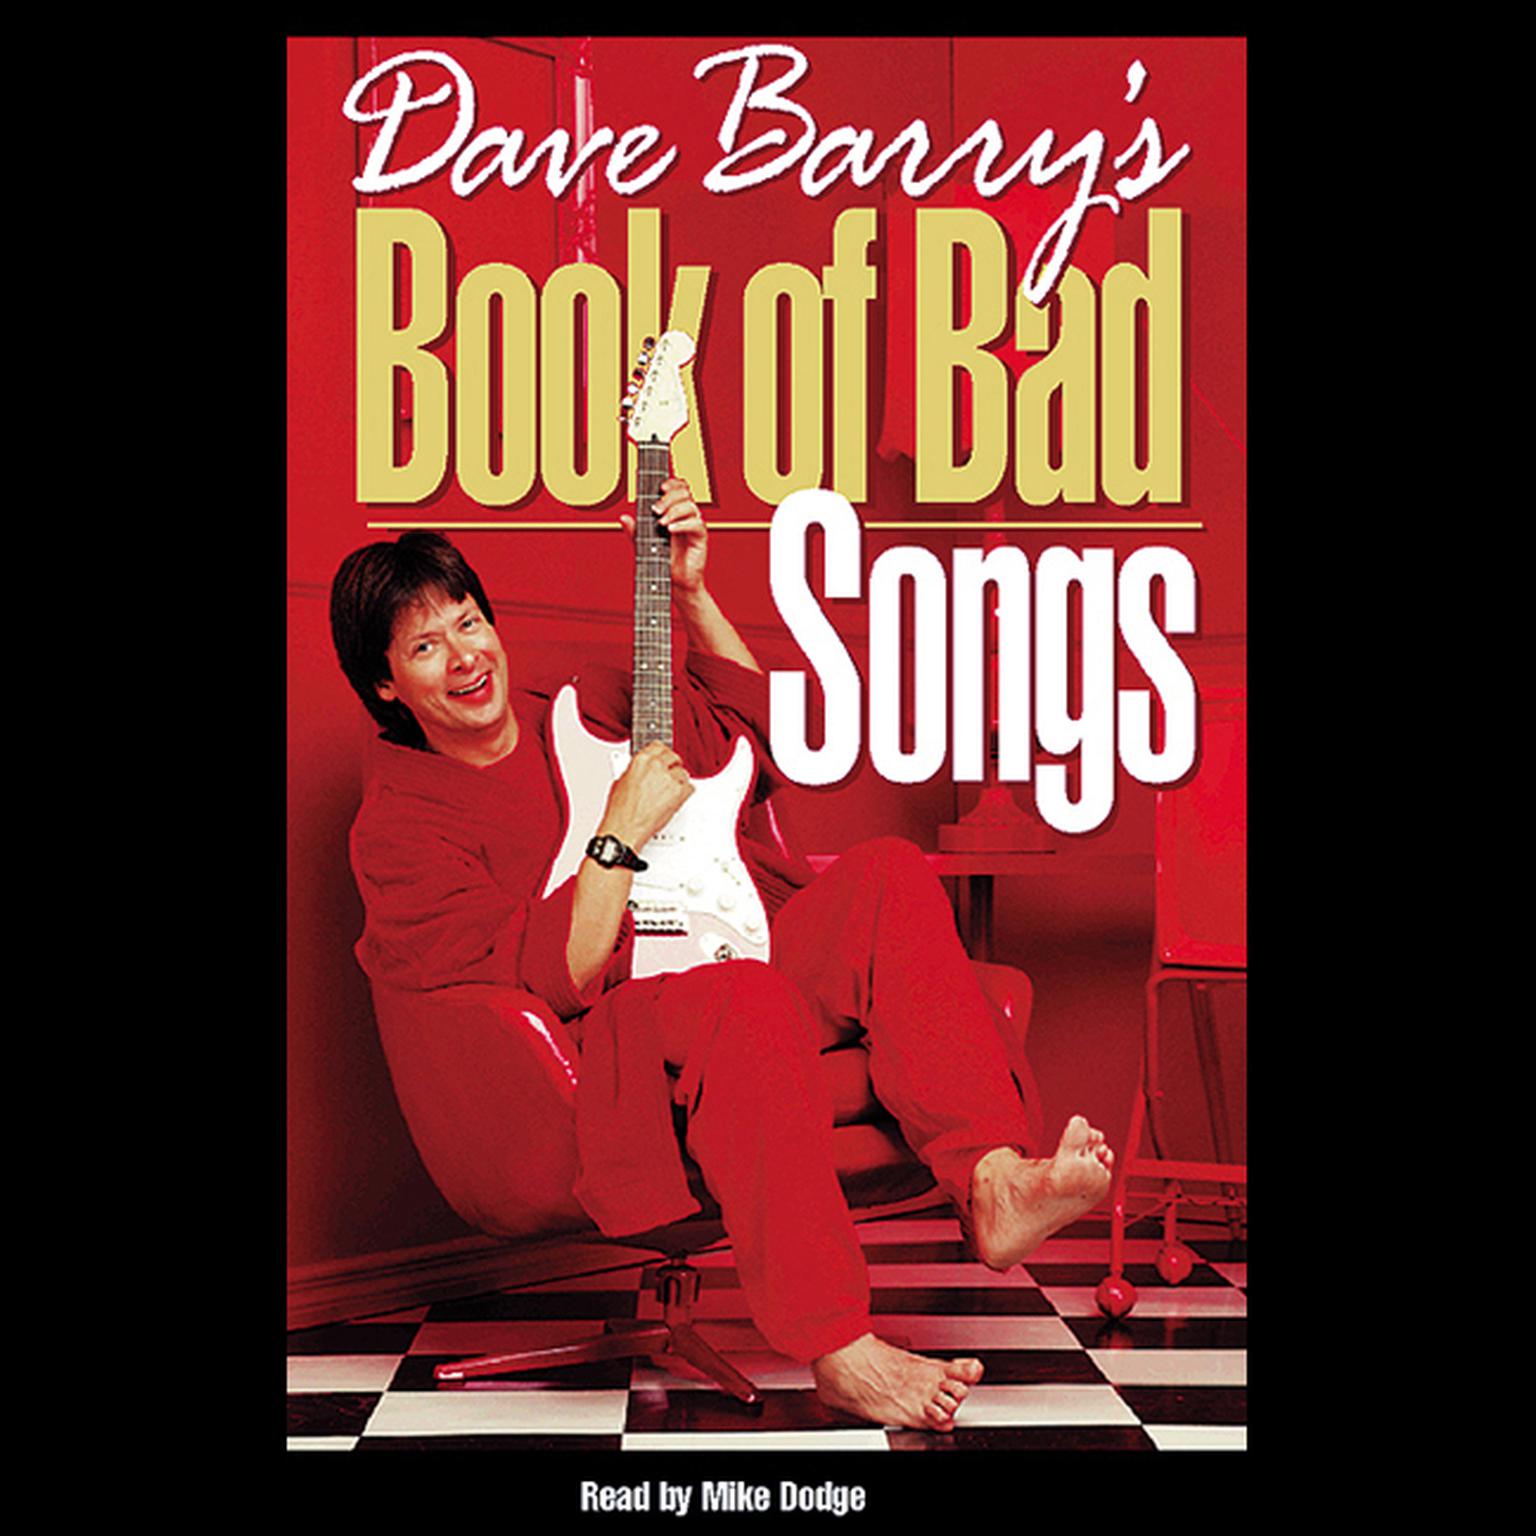 Dave Barrys Book of Bad Songs (Abridged) Audiobook, by Dave Barry